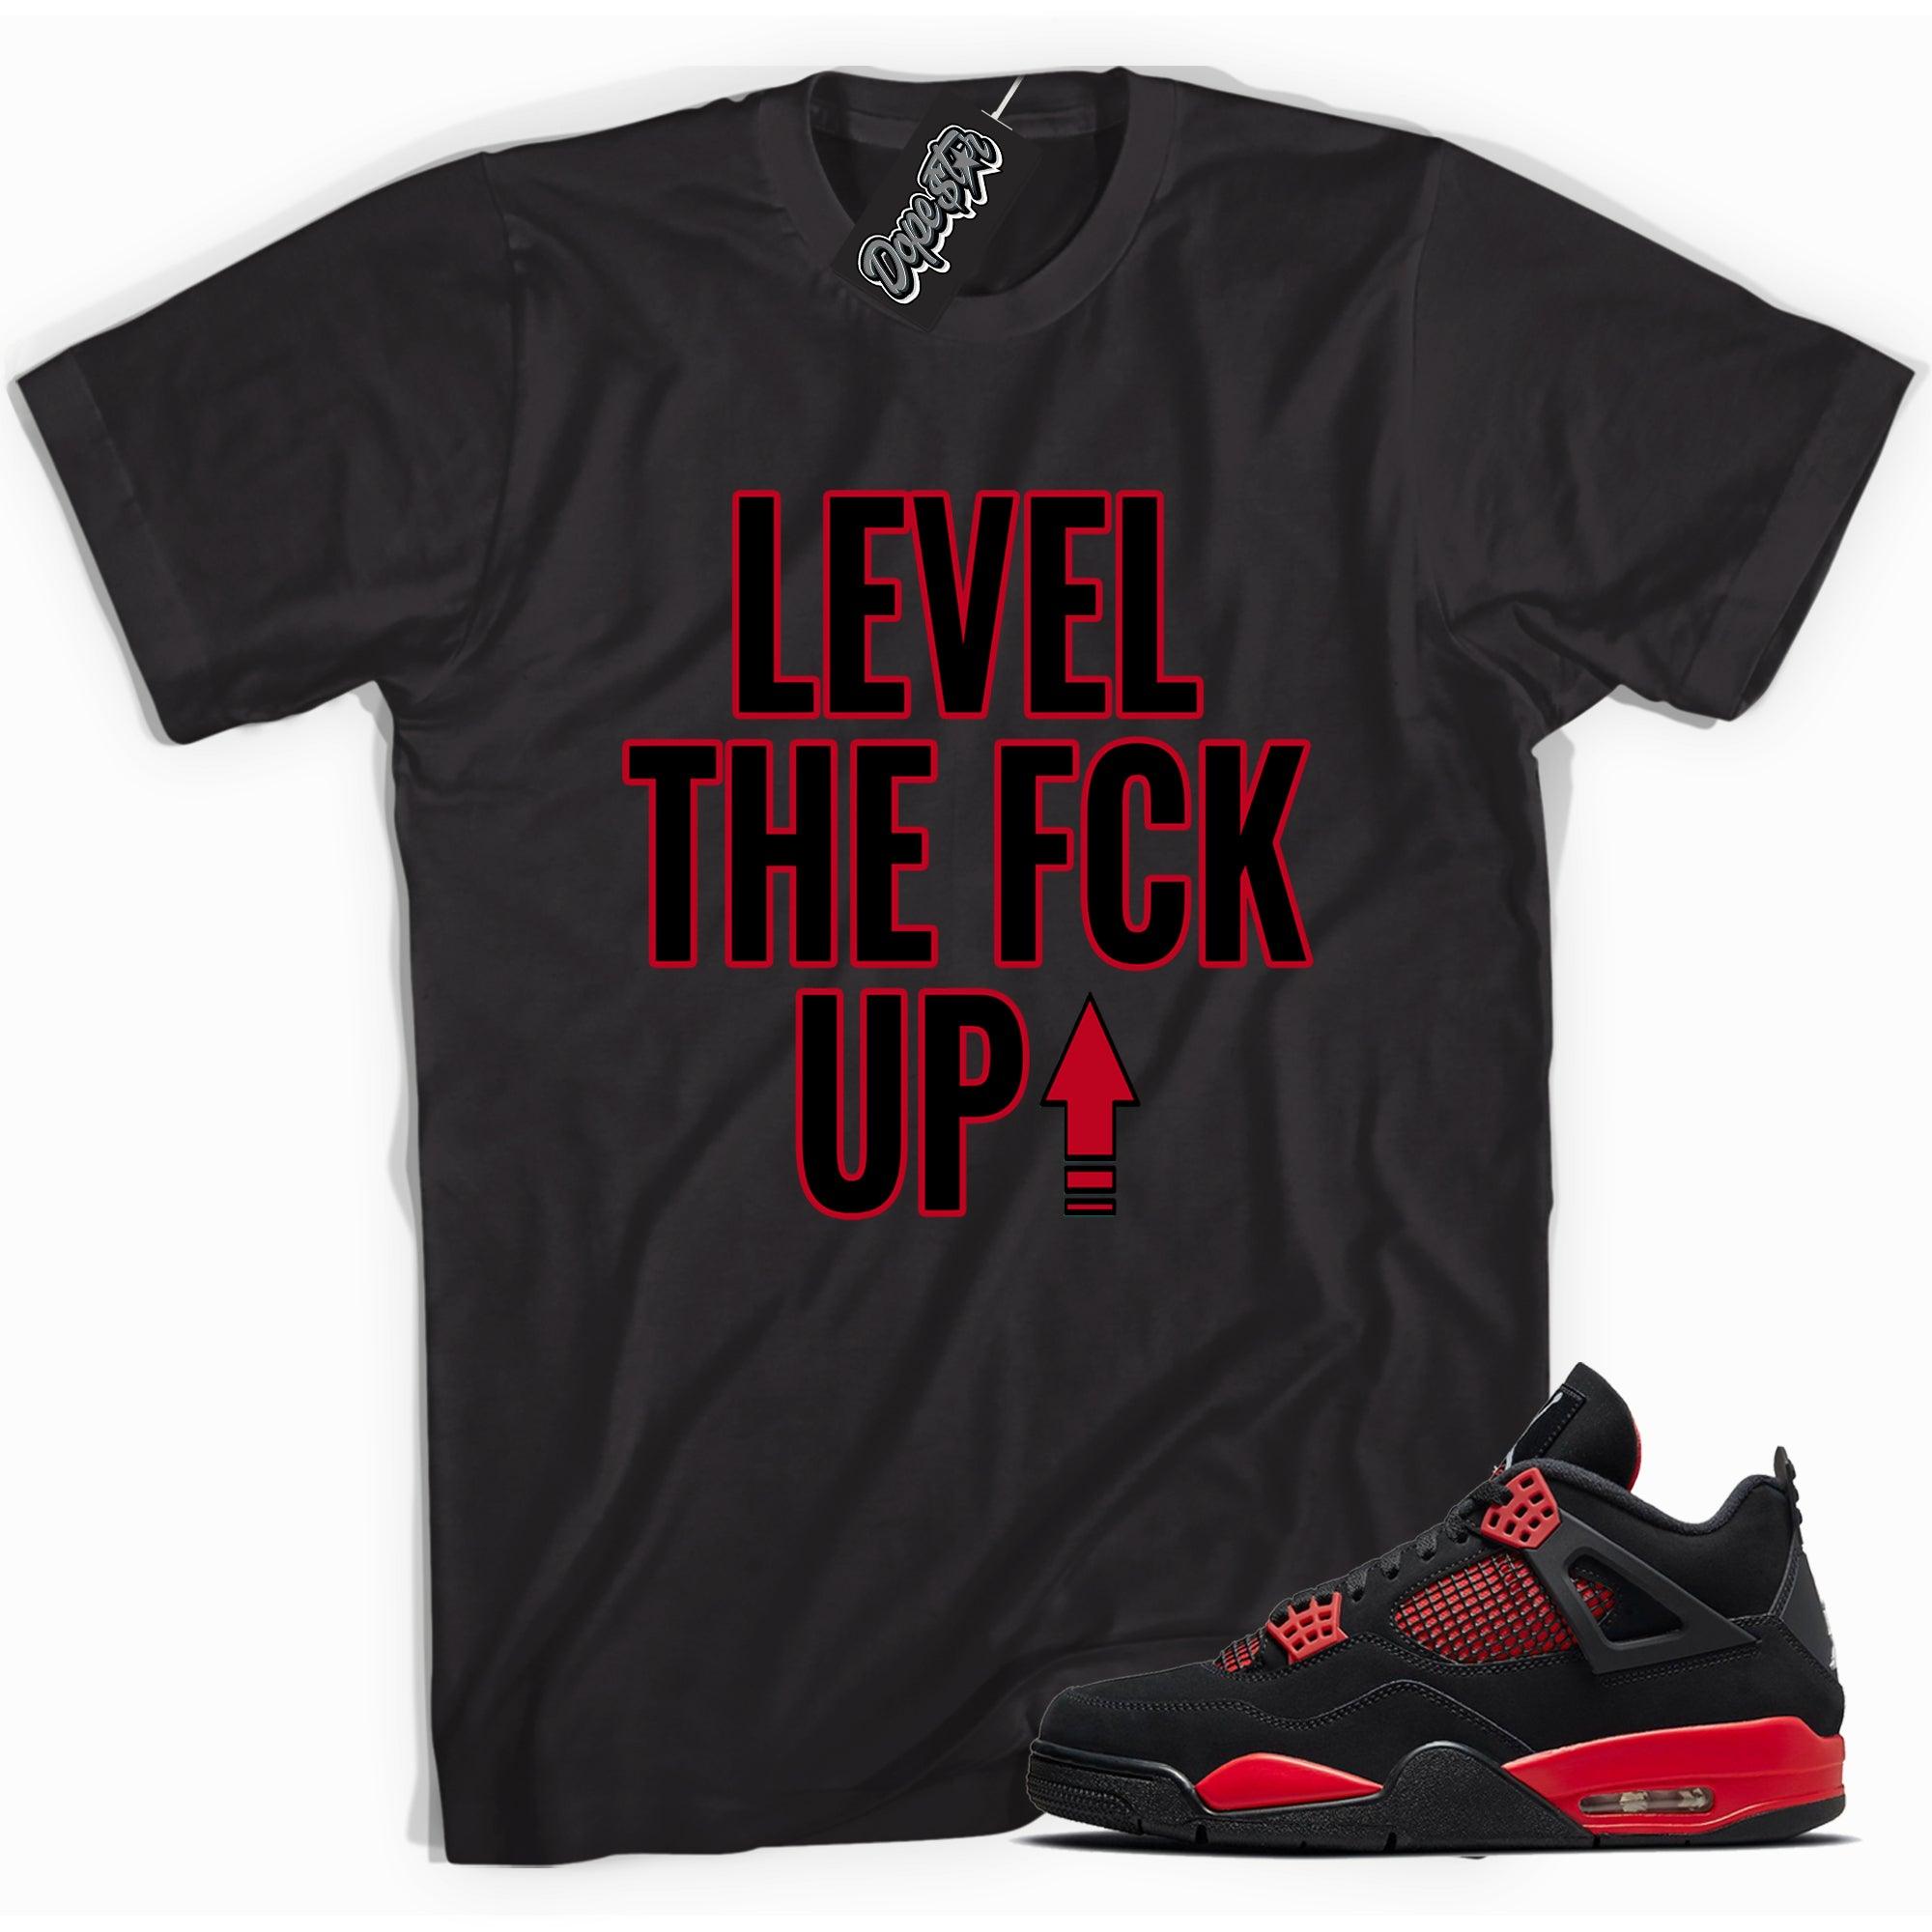 Cool black graphic tee with 'Level Up' print, that perfectly matches Air Jordan 4 Red Thunder Toe sneakers.